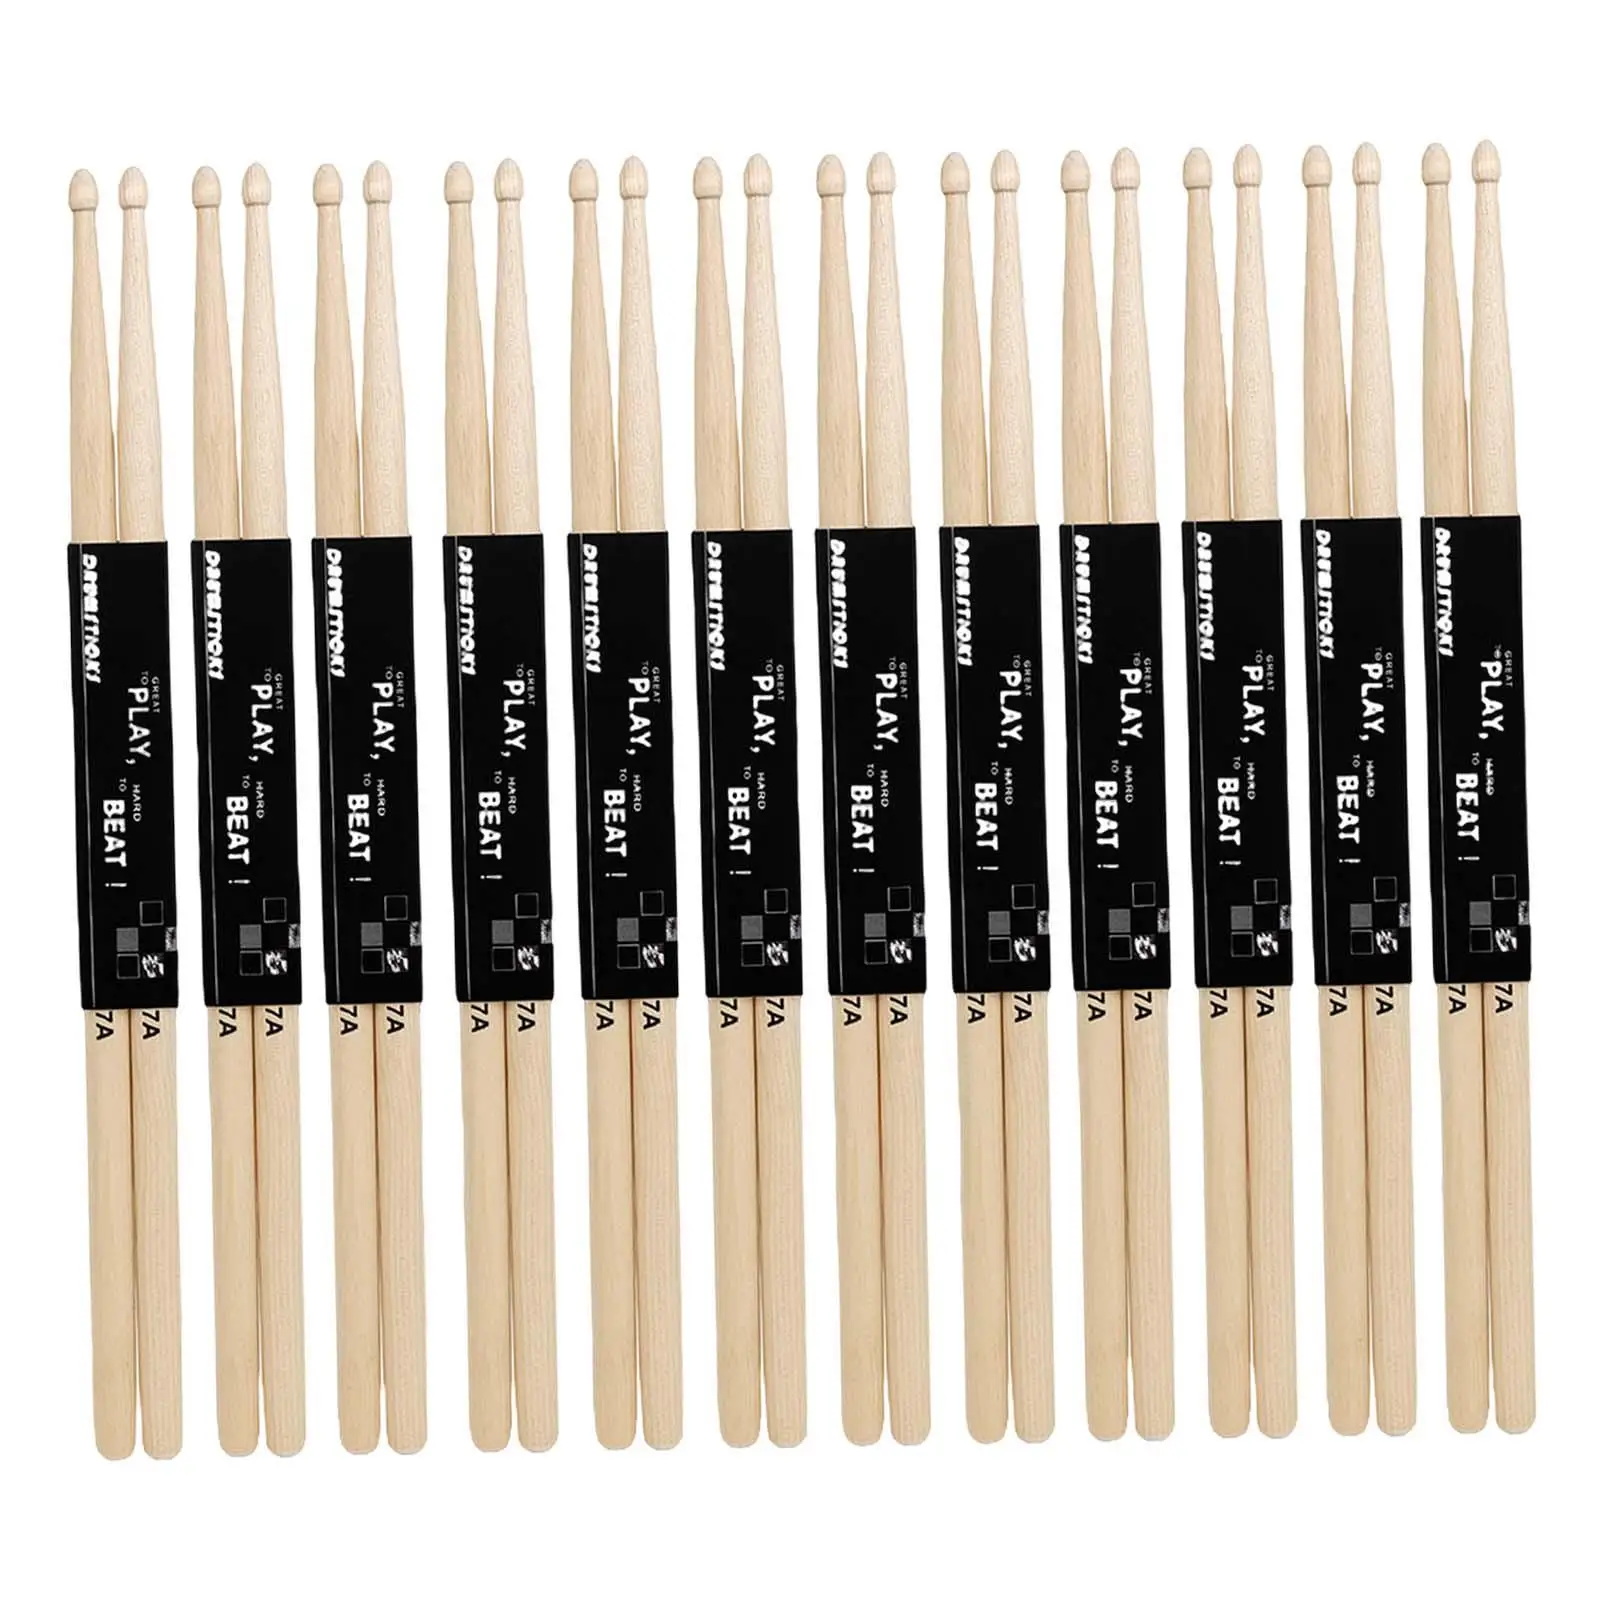 12 Pairs Professional Drum Percussion Sticks for Beginners Children Adults